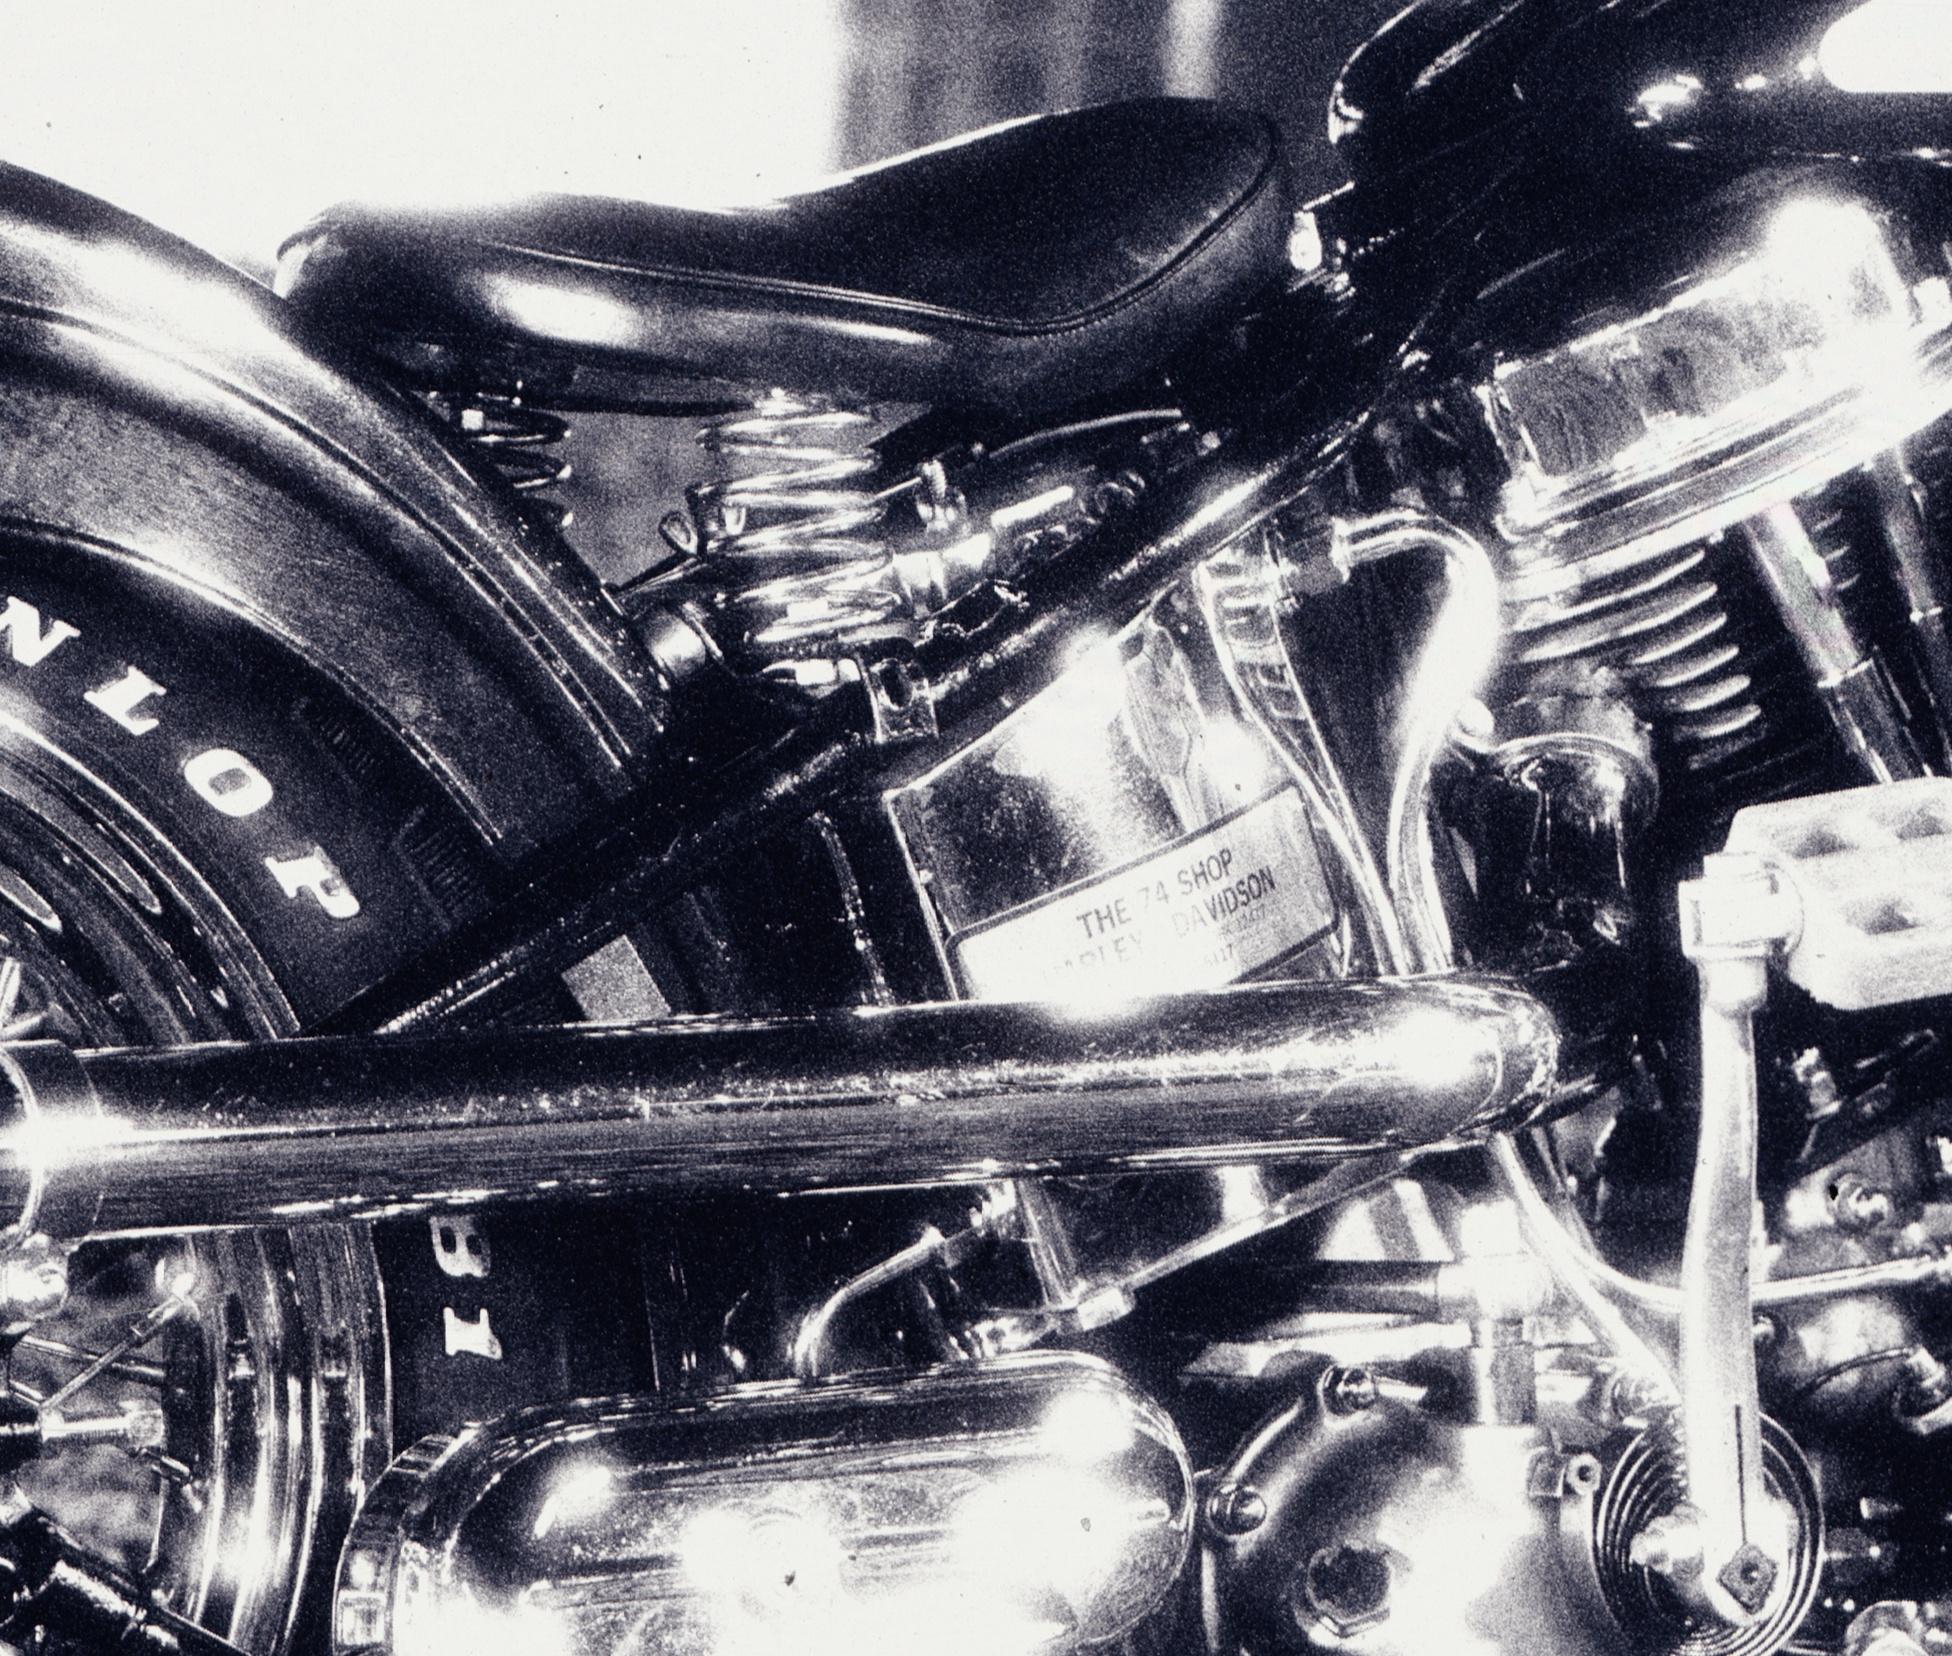 black and white motorcycle pictures